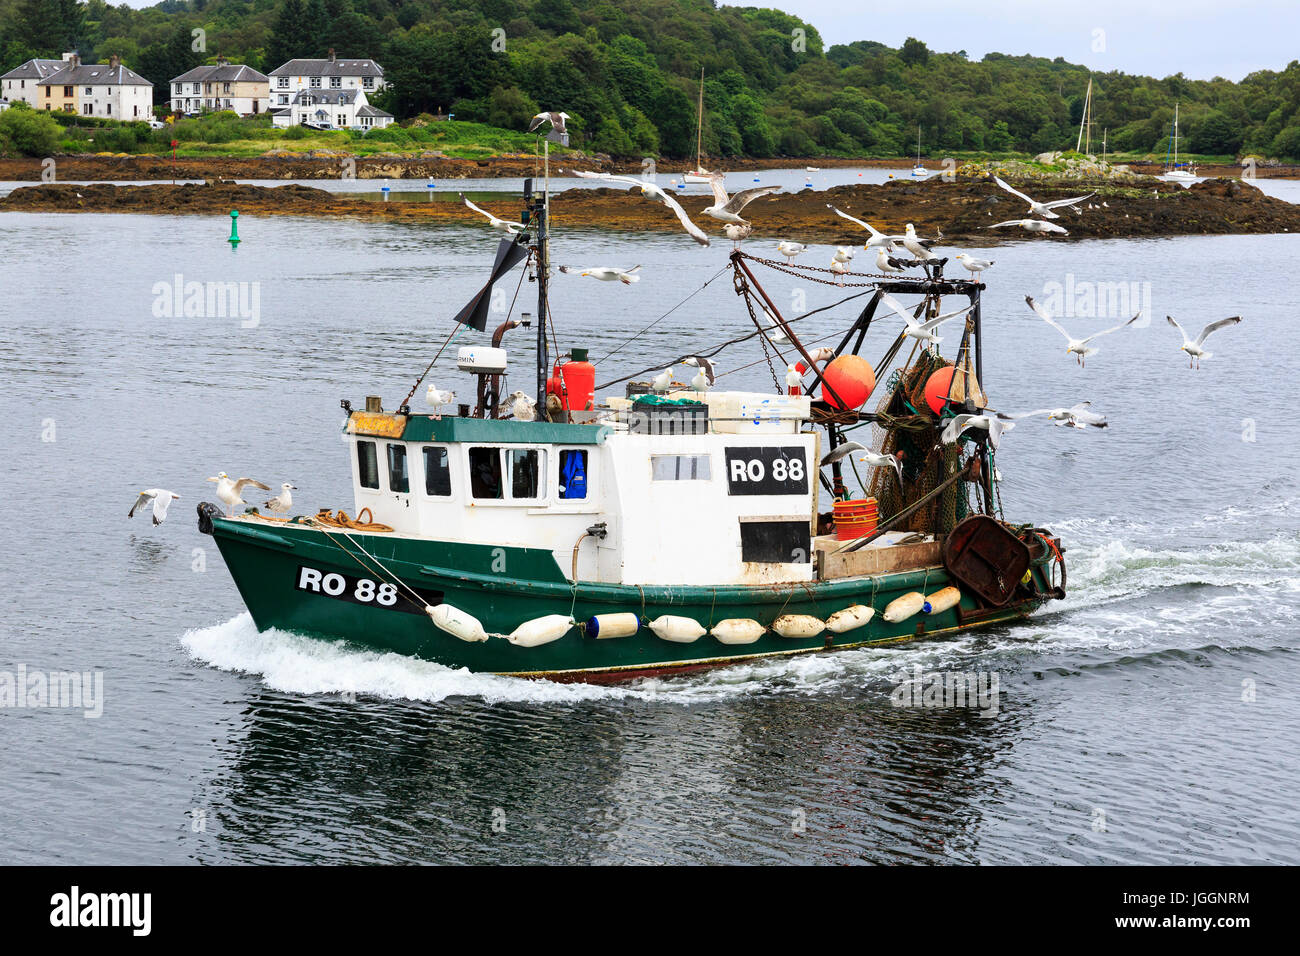 Fishing boat coming into Tarbert harbour, Loch Fyne surrounded by seagulls, Scotland, UK Stock Photo